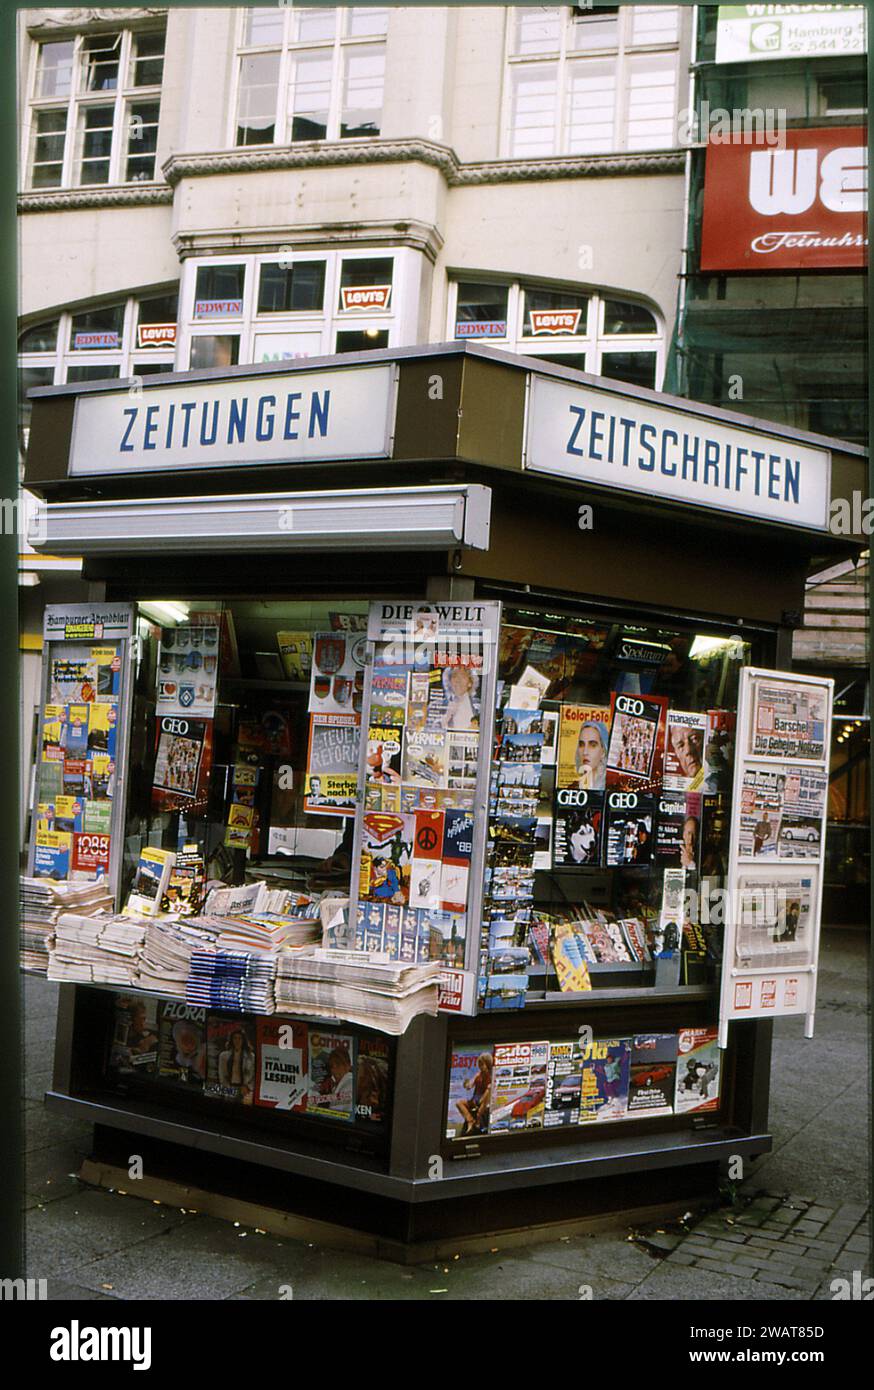 Hamburg/Germany /Historical file images) German news apers and magazine and and otehr thing stand in pedestrain street in german town.   (Photo.Francis Joseph Dean/Dean Pictures) Stock Photo